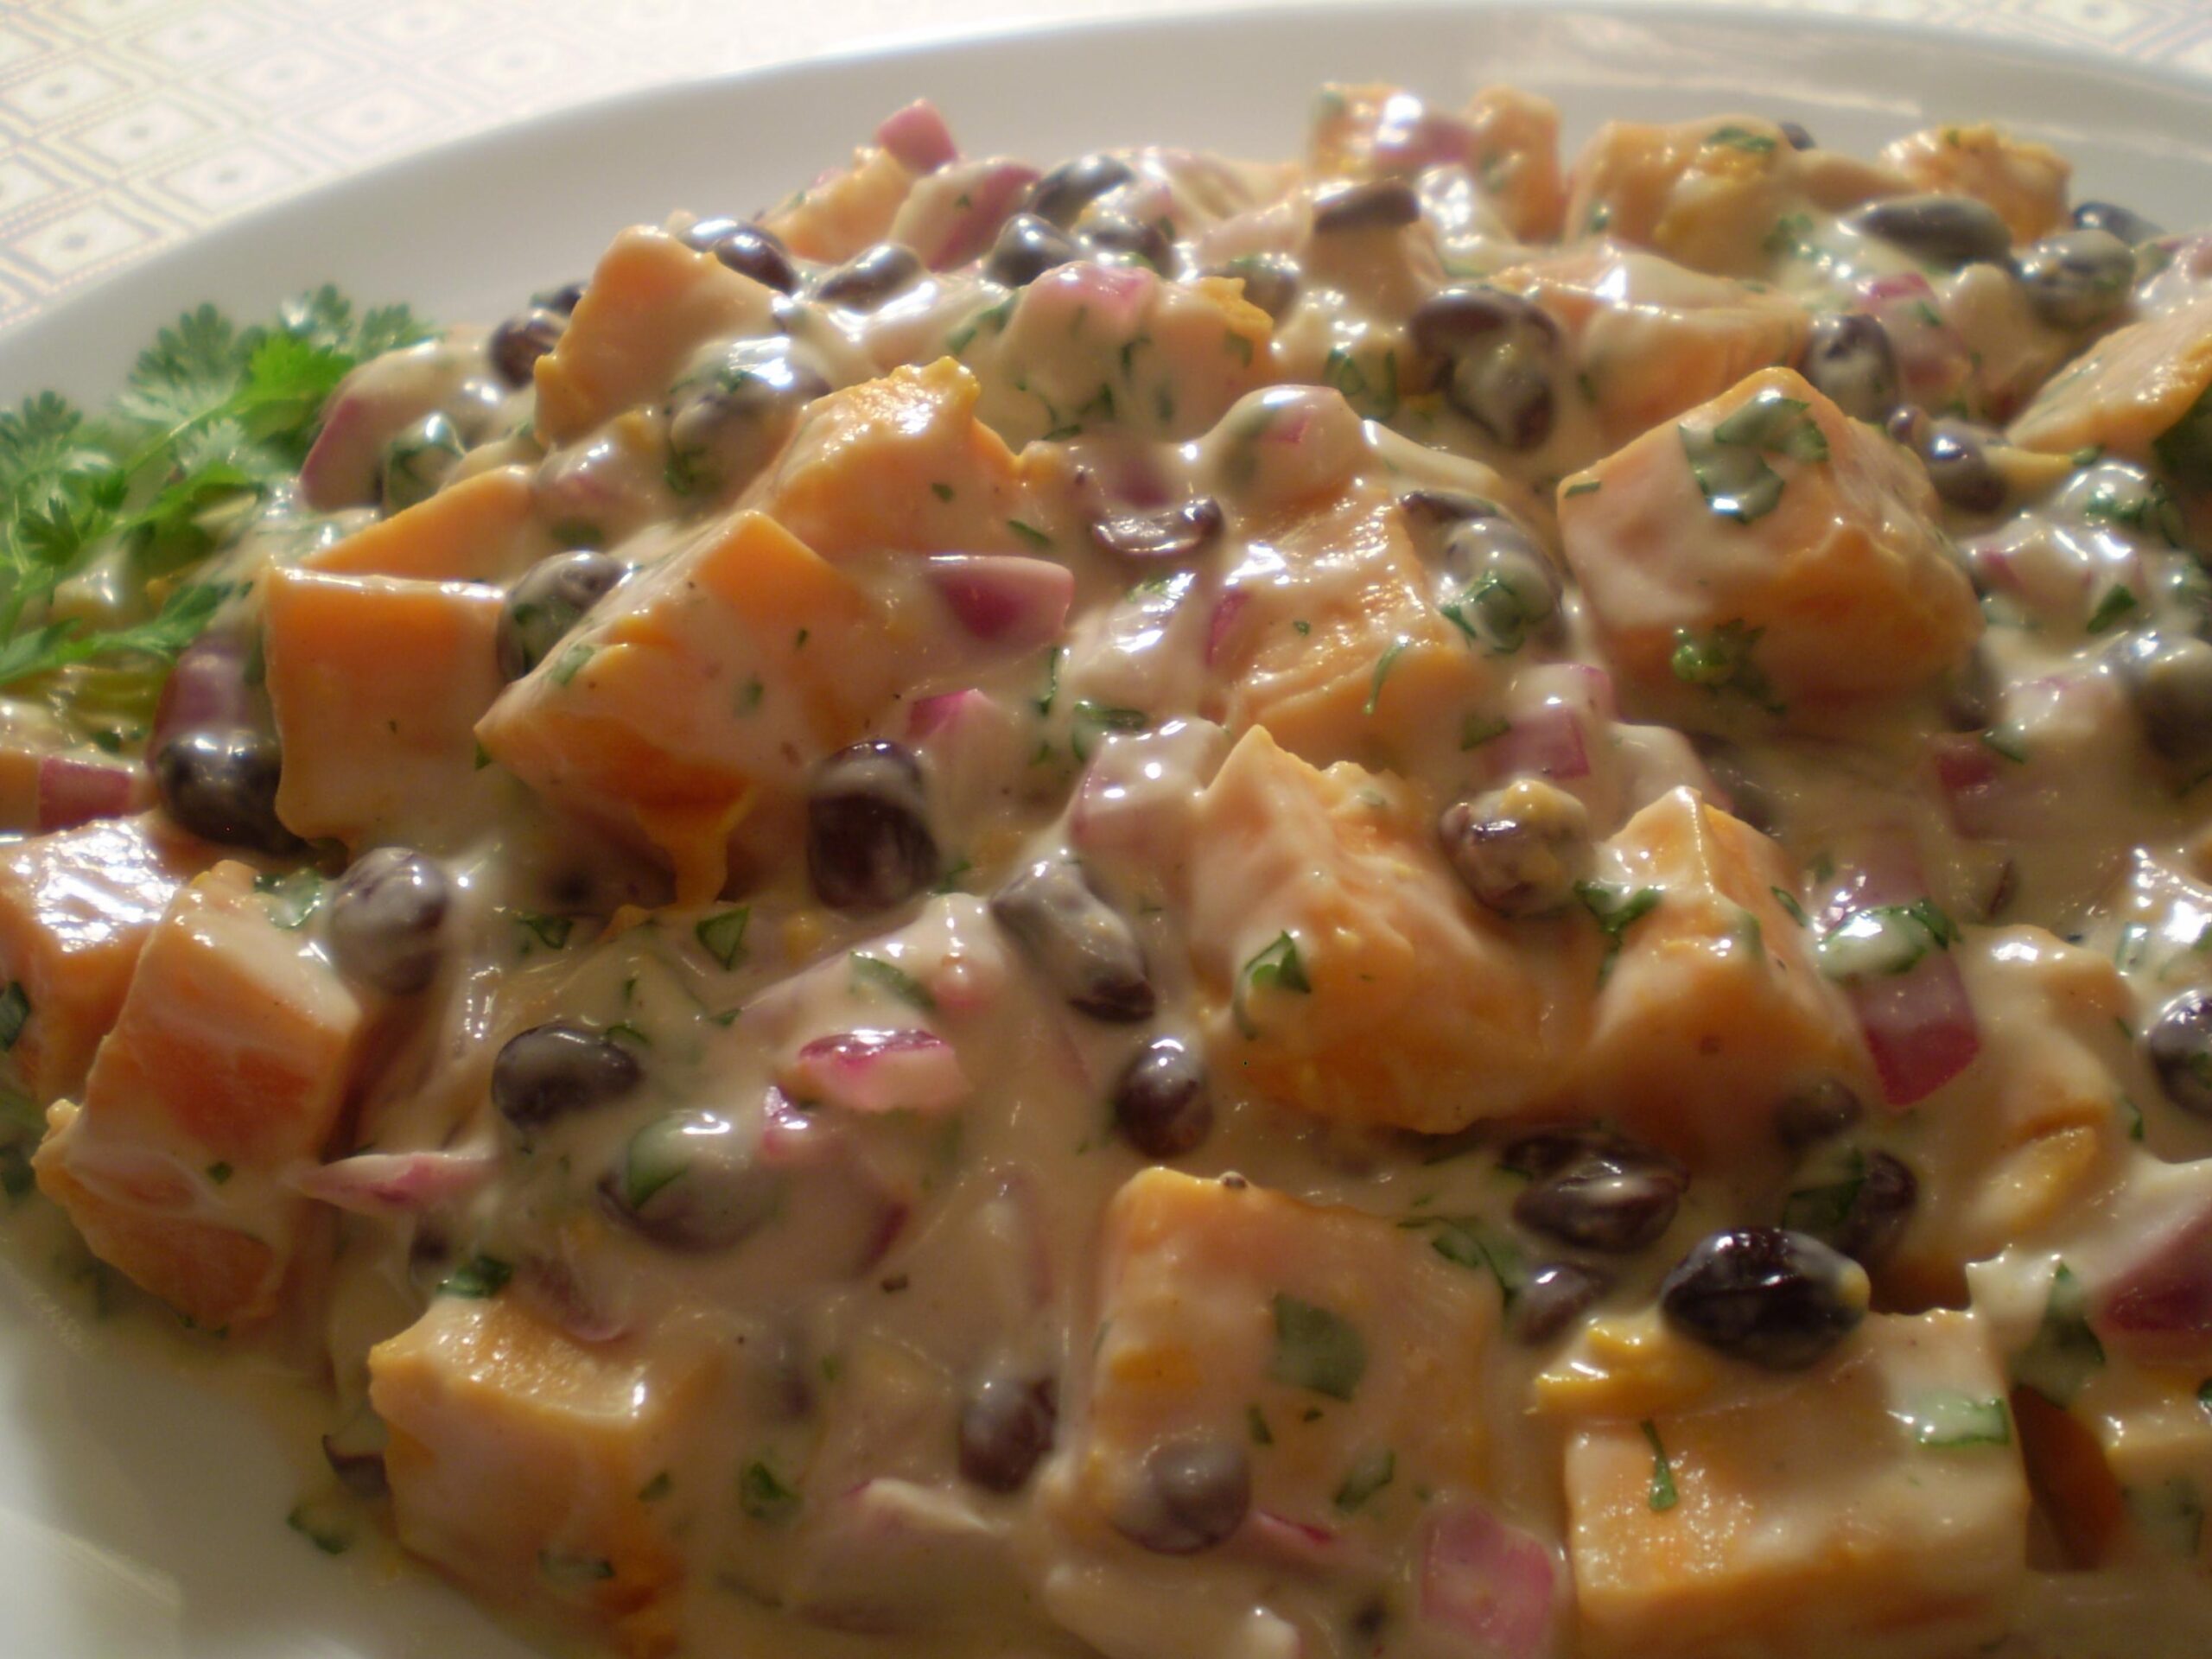  A new twist to traditional potato salad that will keep you coming back for more.